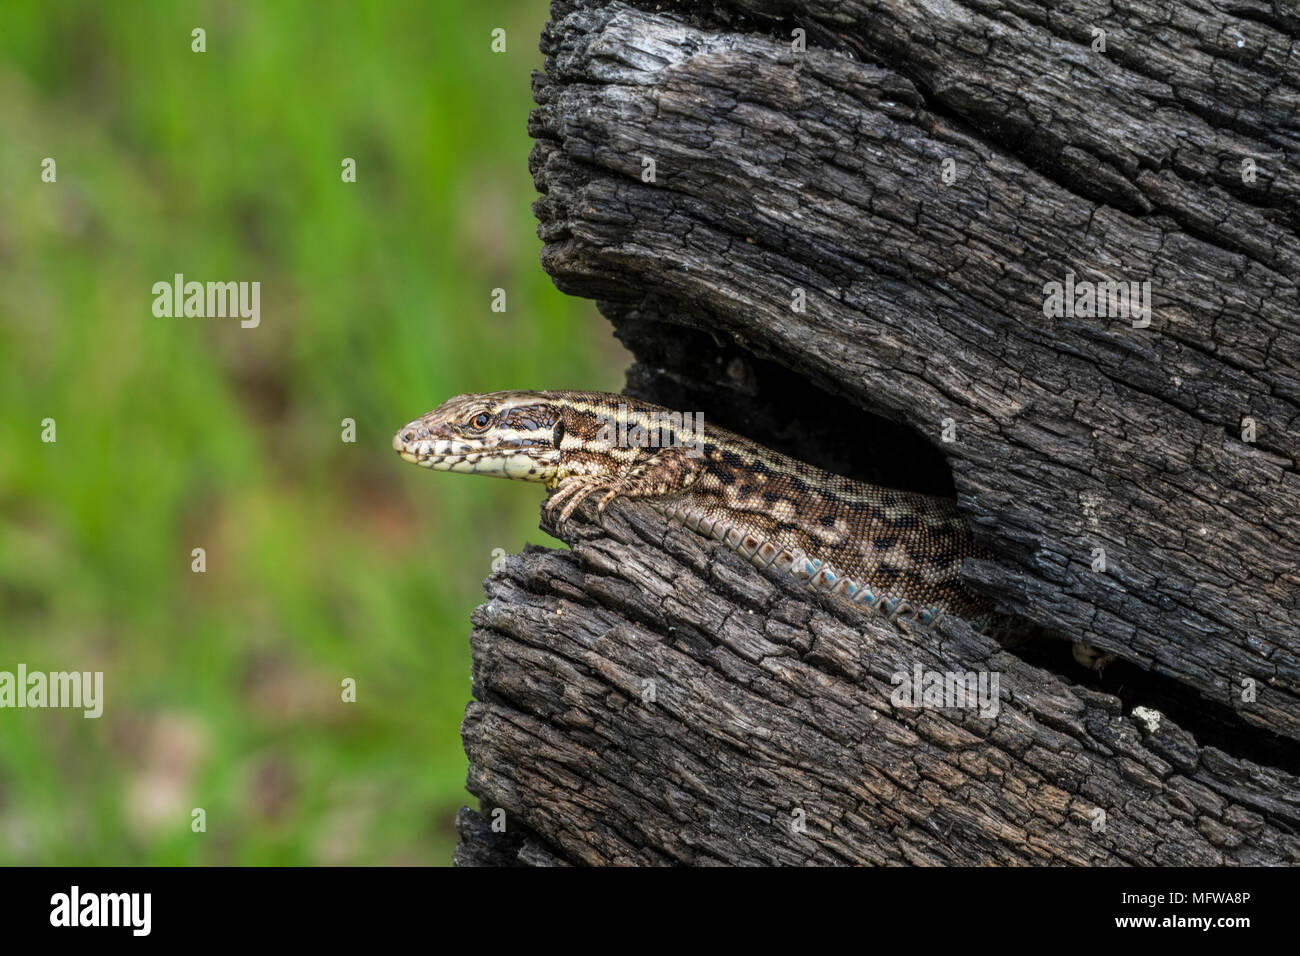 Common wall lizard (Podarcis muralis / Lacerta muralis) male emerging from gap in scorched tree trunk Stock Photo